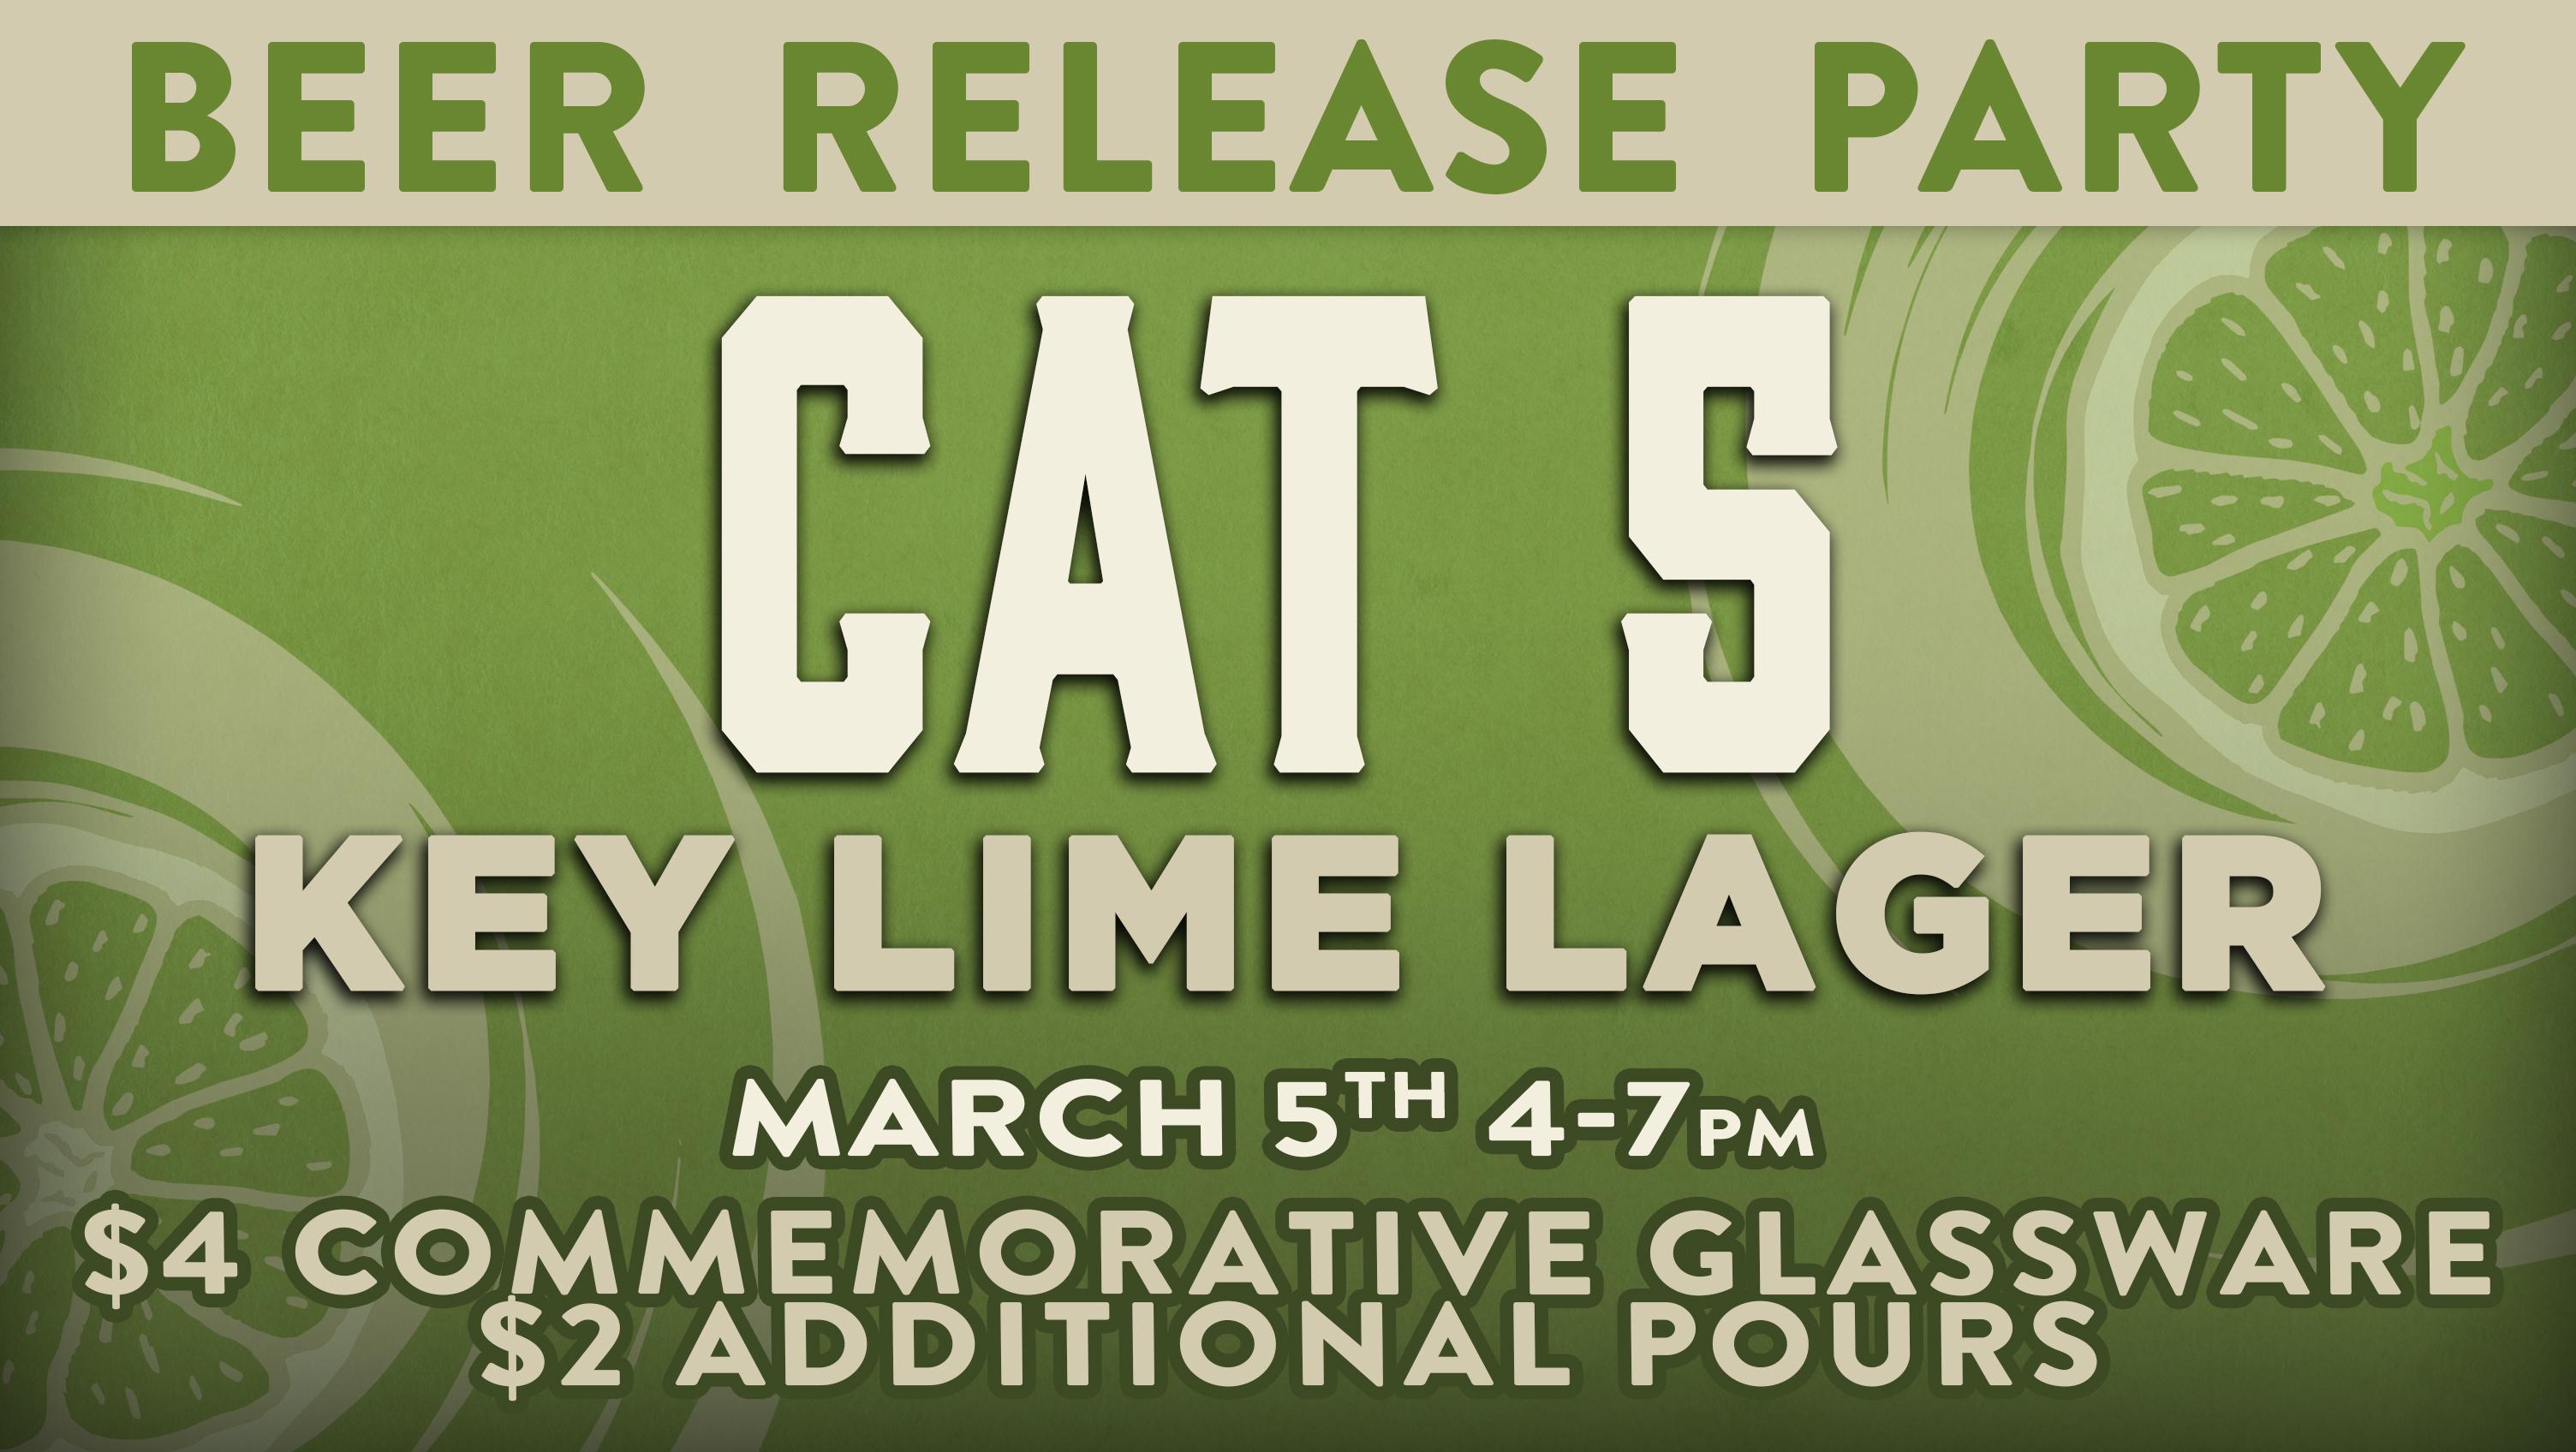 Cat 5 Key Lime Lager Beer Release